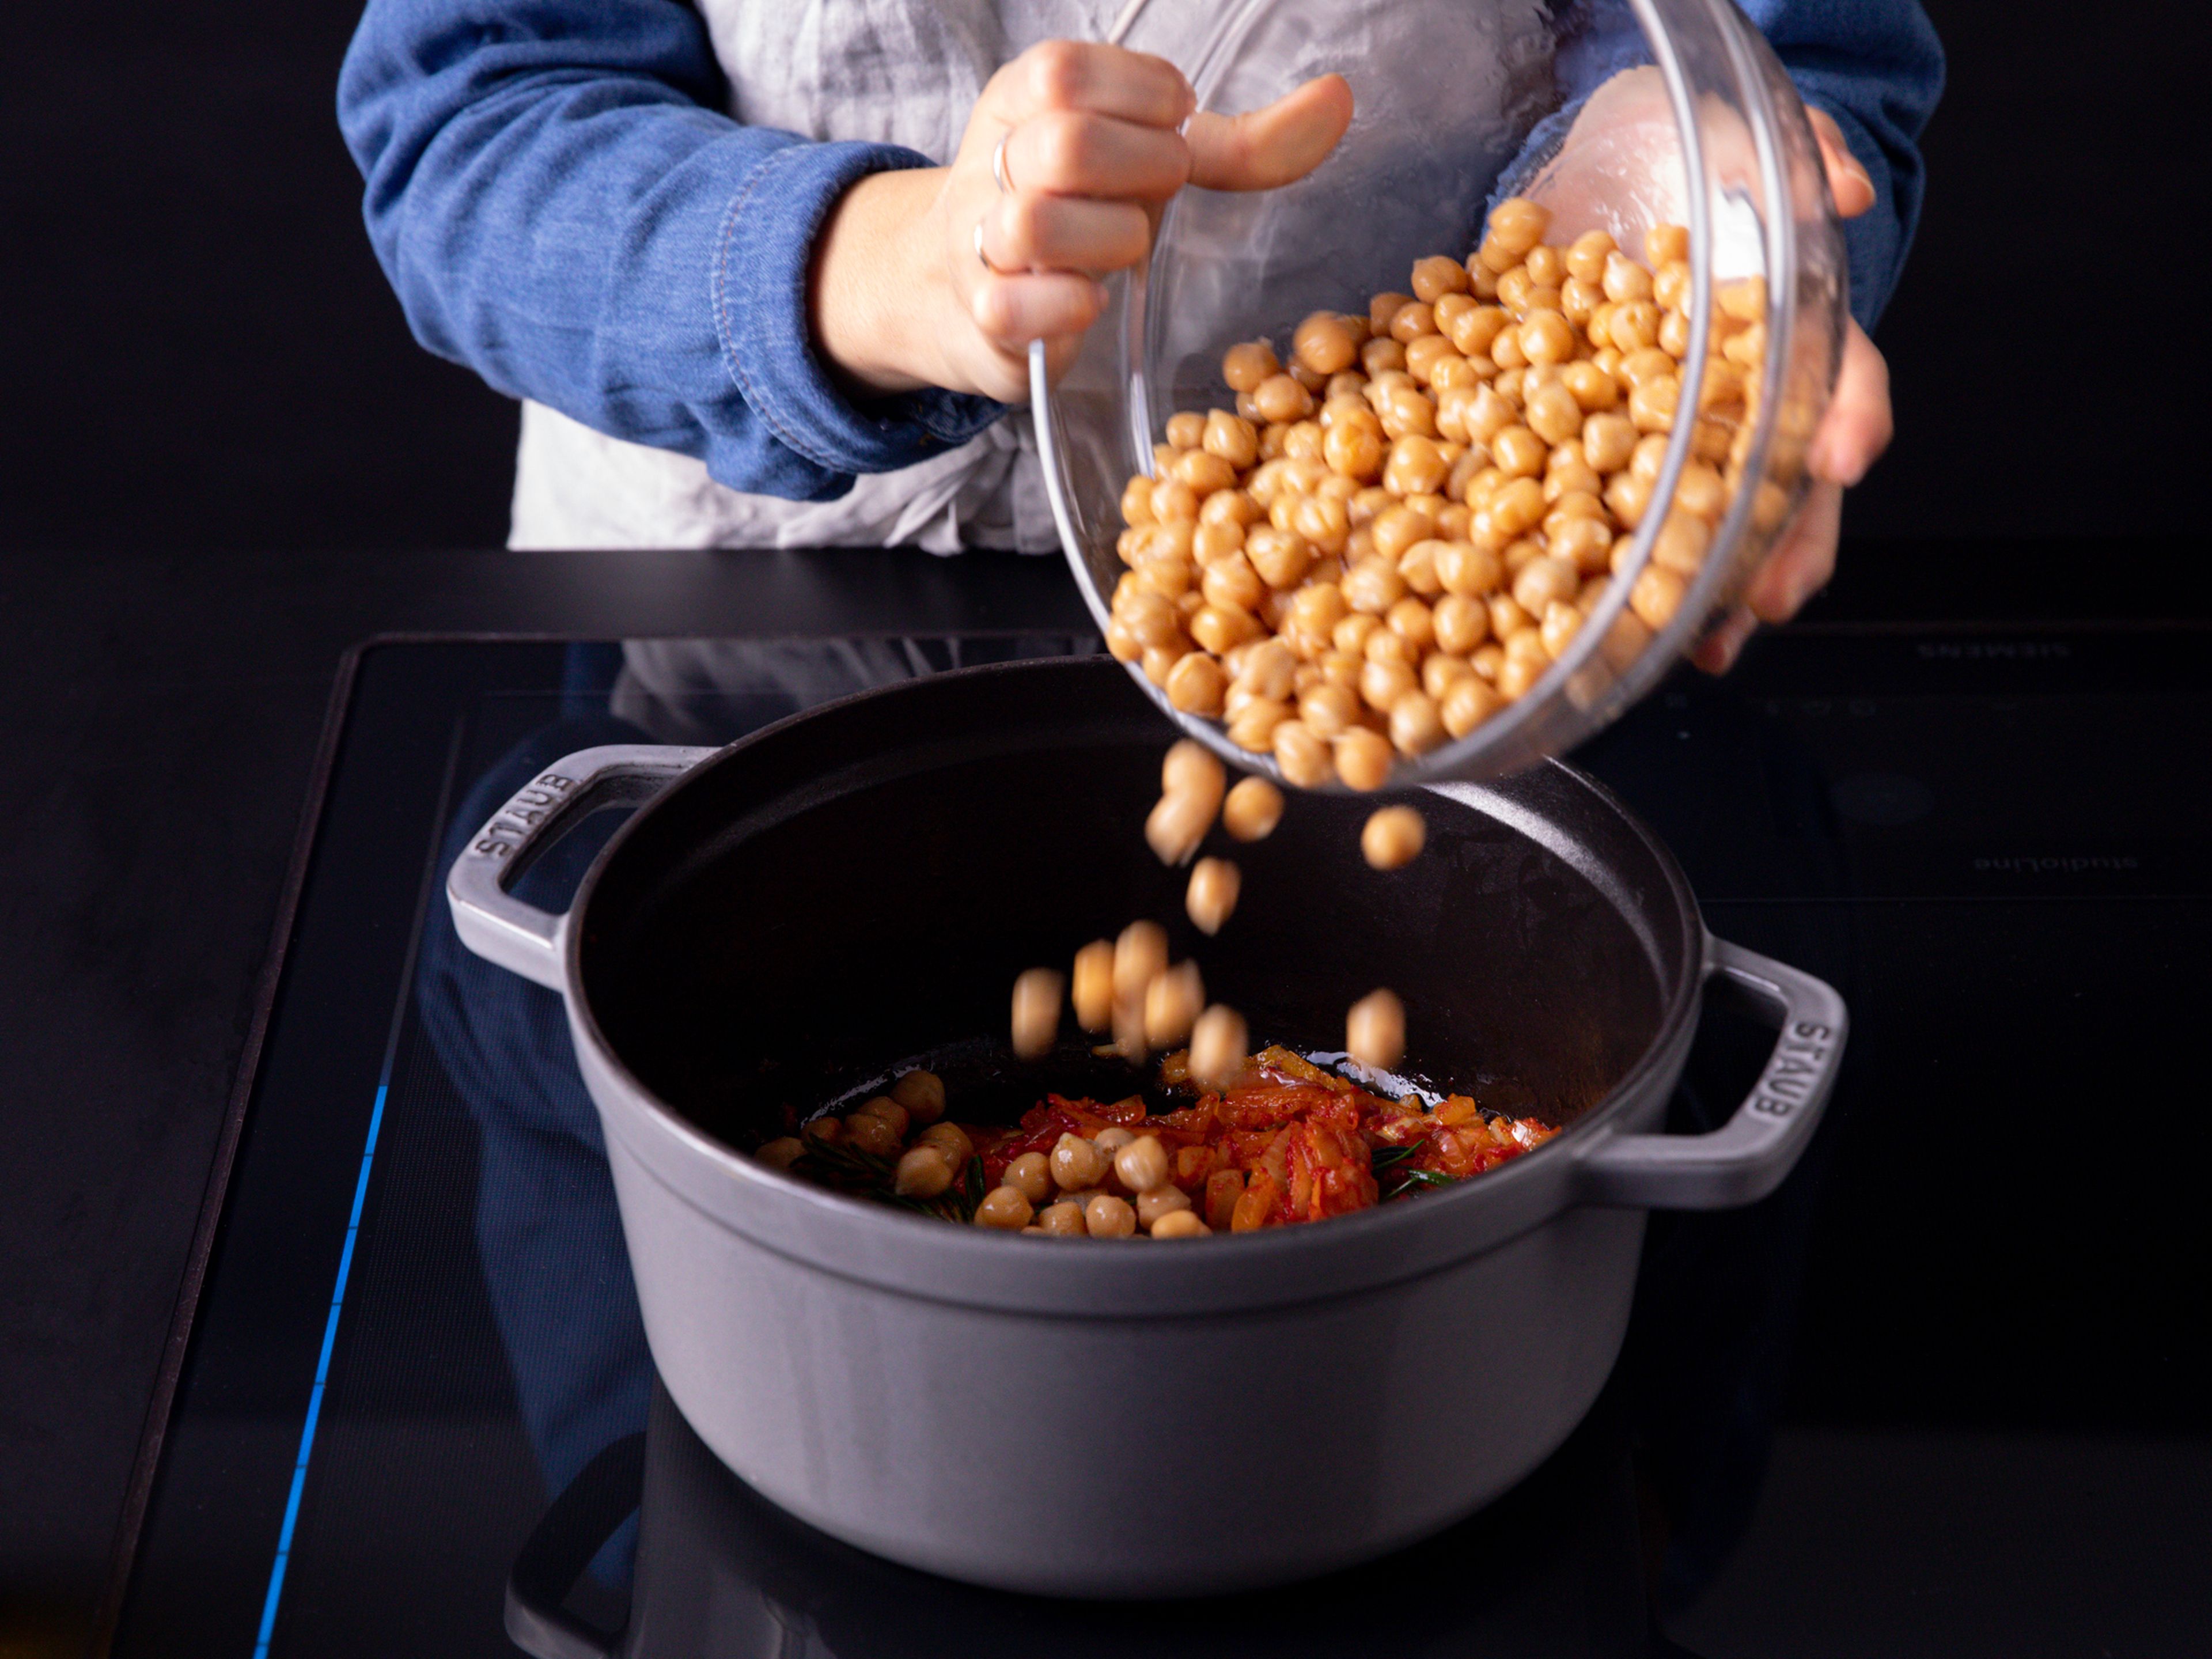 Add chickpeas and water to the pot. Season with salt, bring to a boil, then reduce heat to medium-low and let simmer for approx. 10 min.